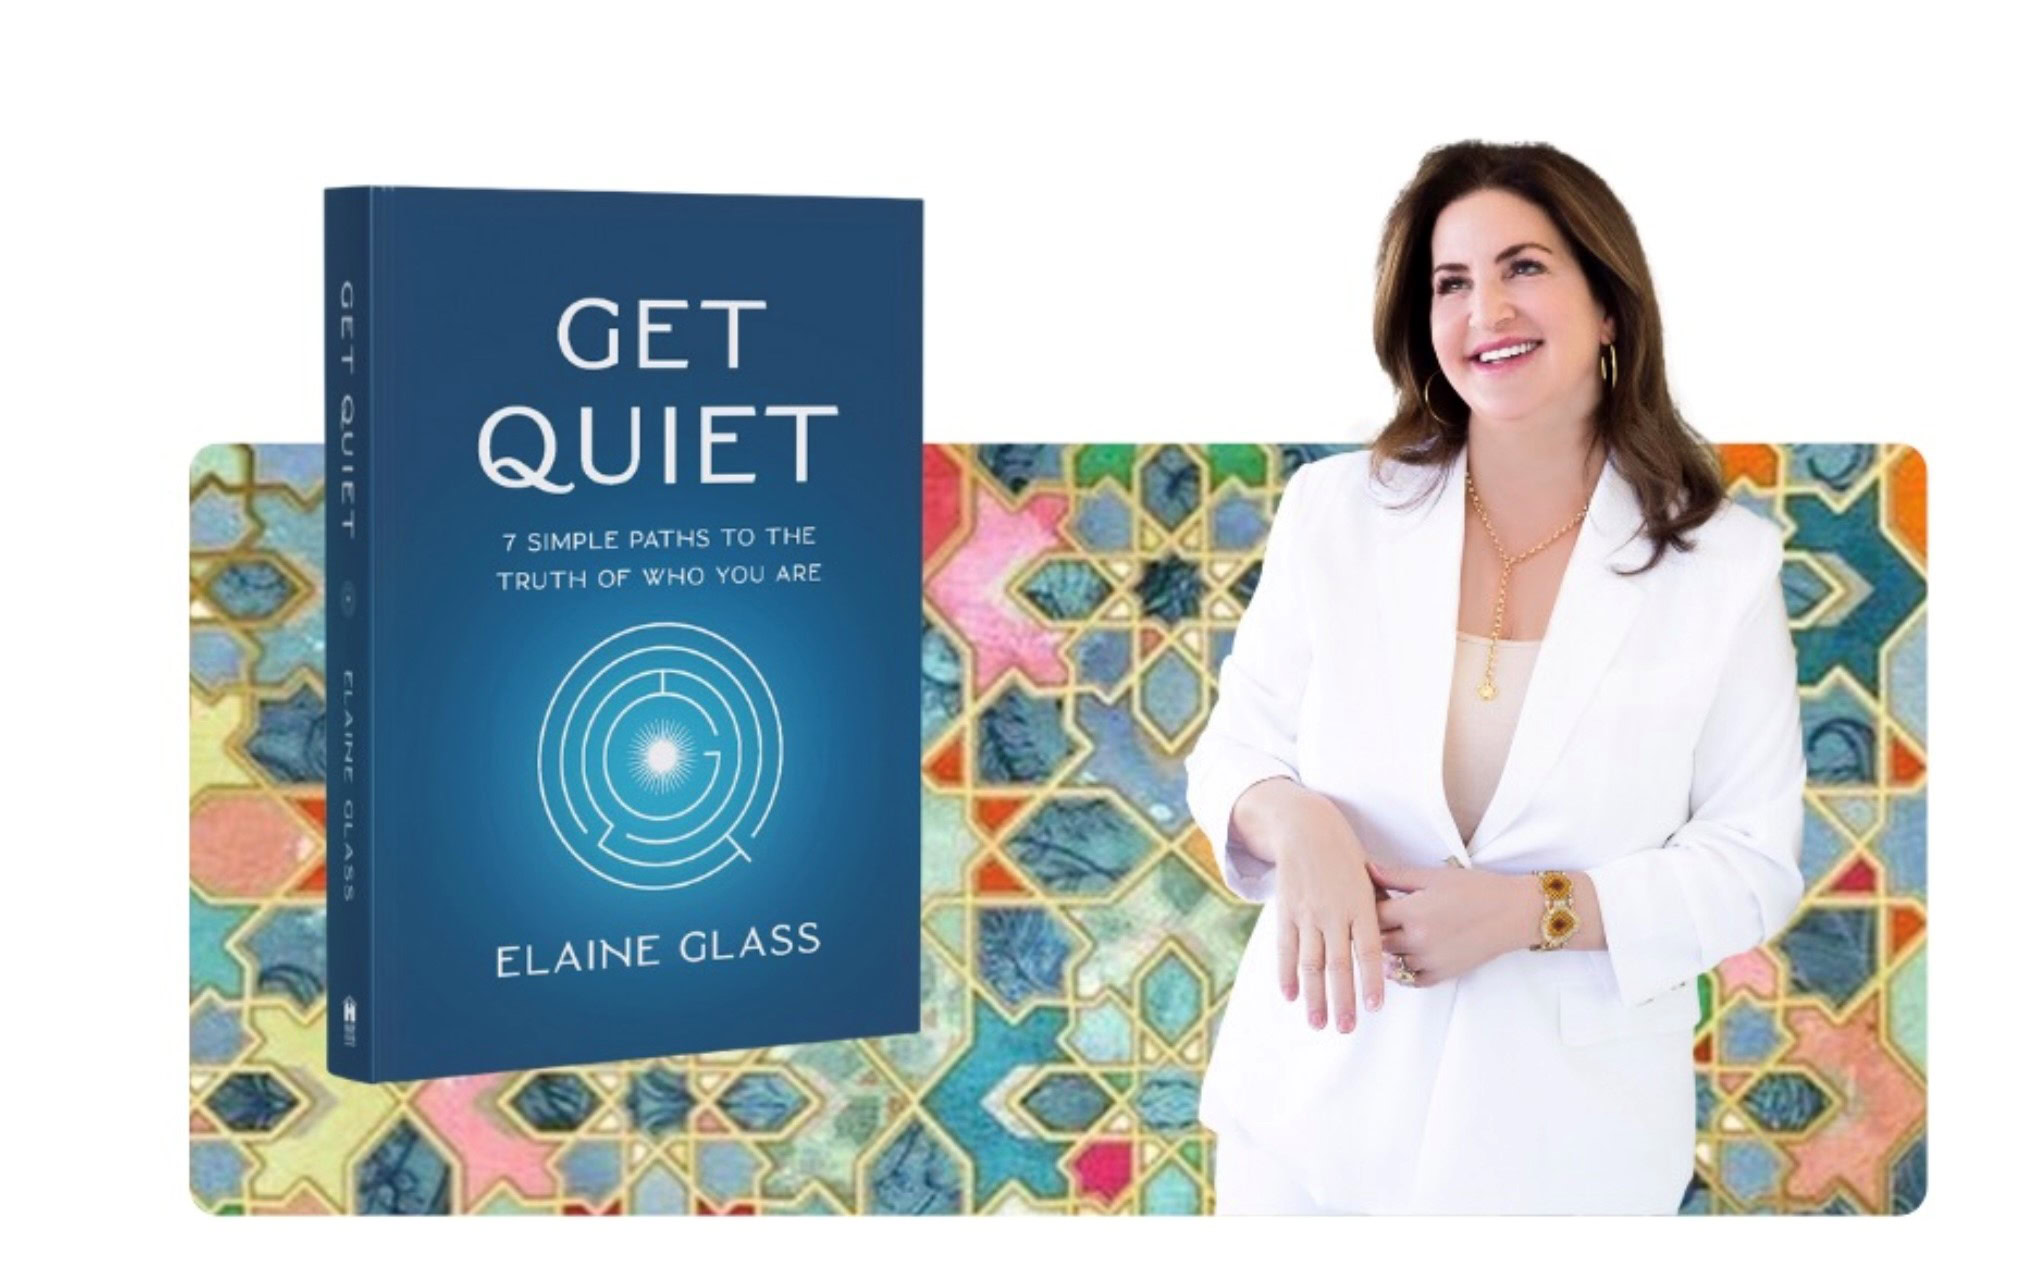 Elaine in white blazer smiling beside a promotional image of her book titled "Get Quiet" by Elaine Glass.